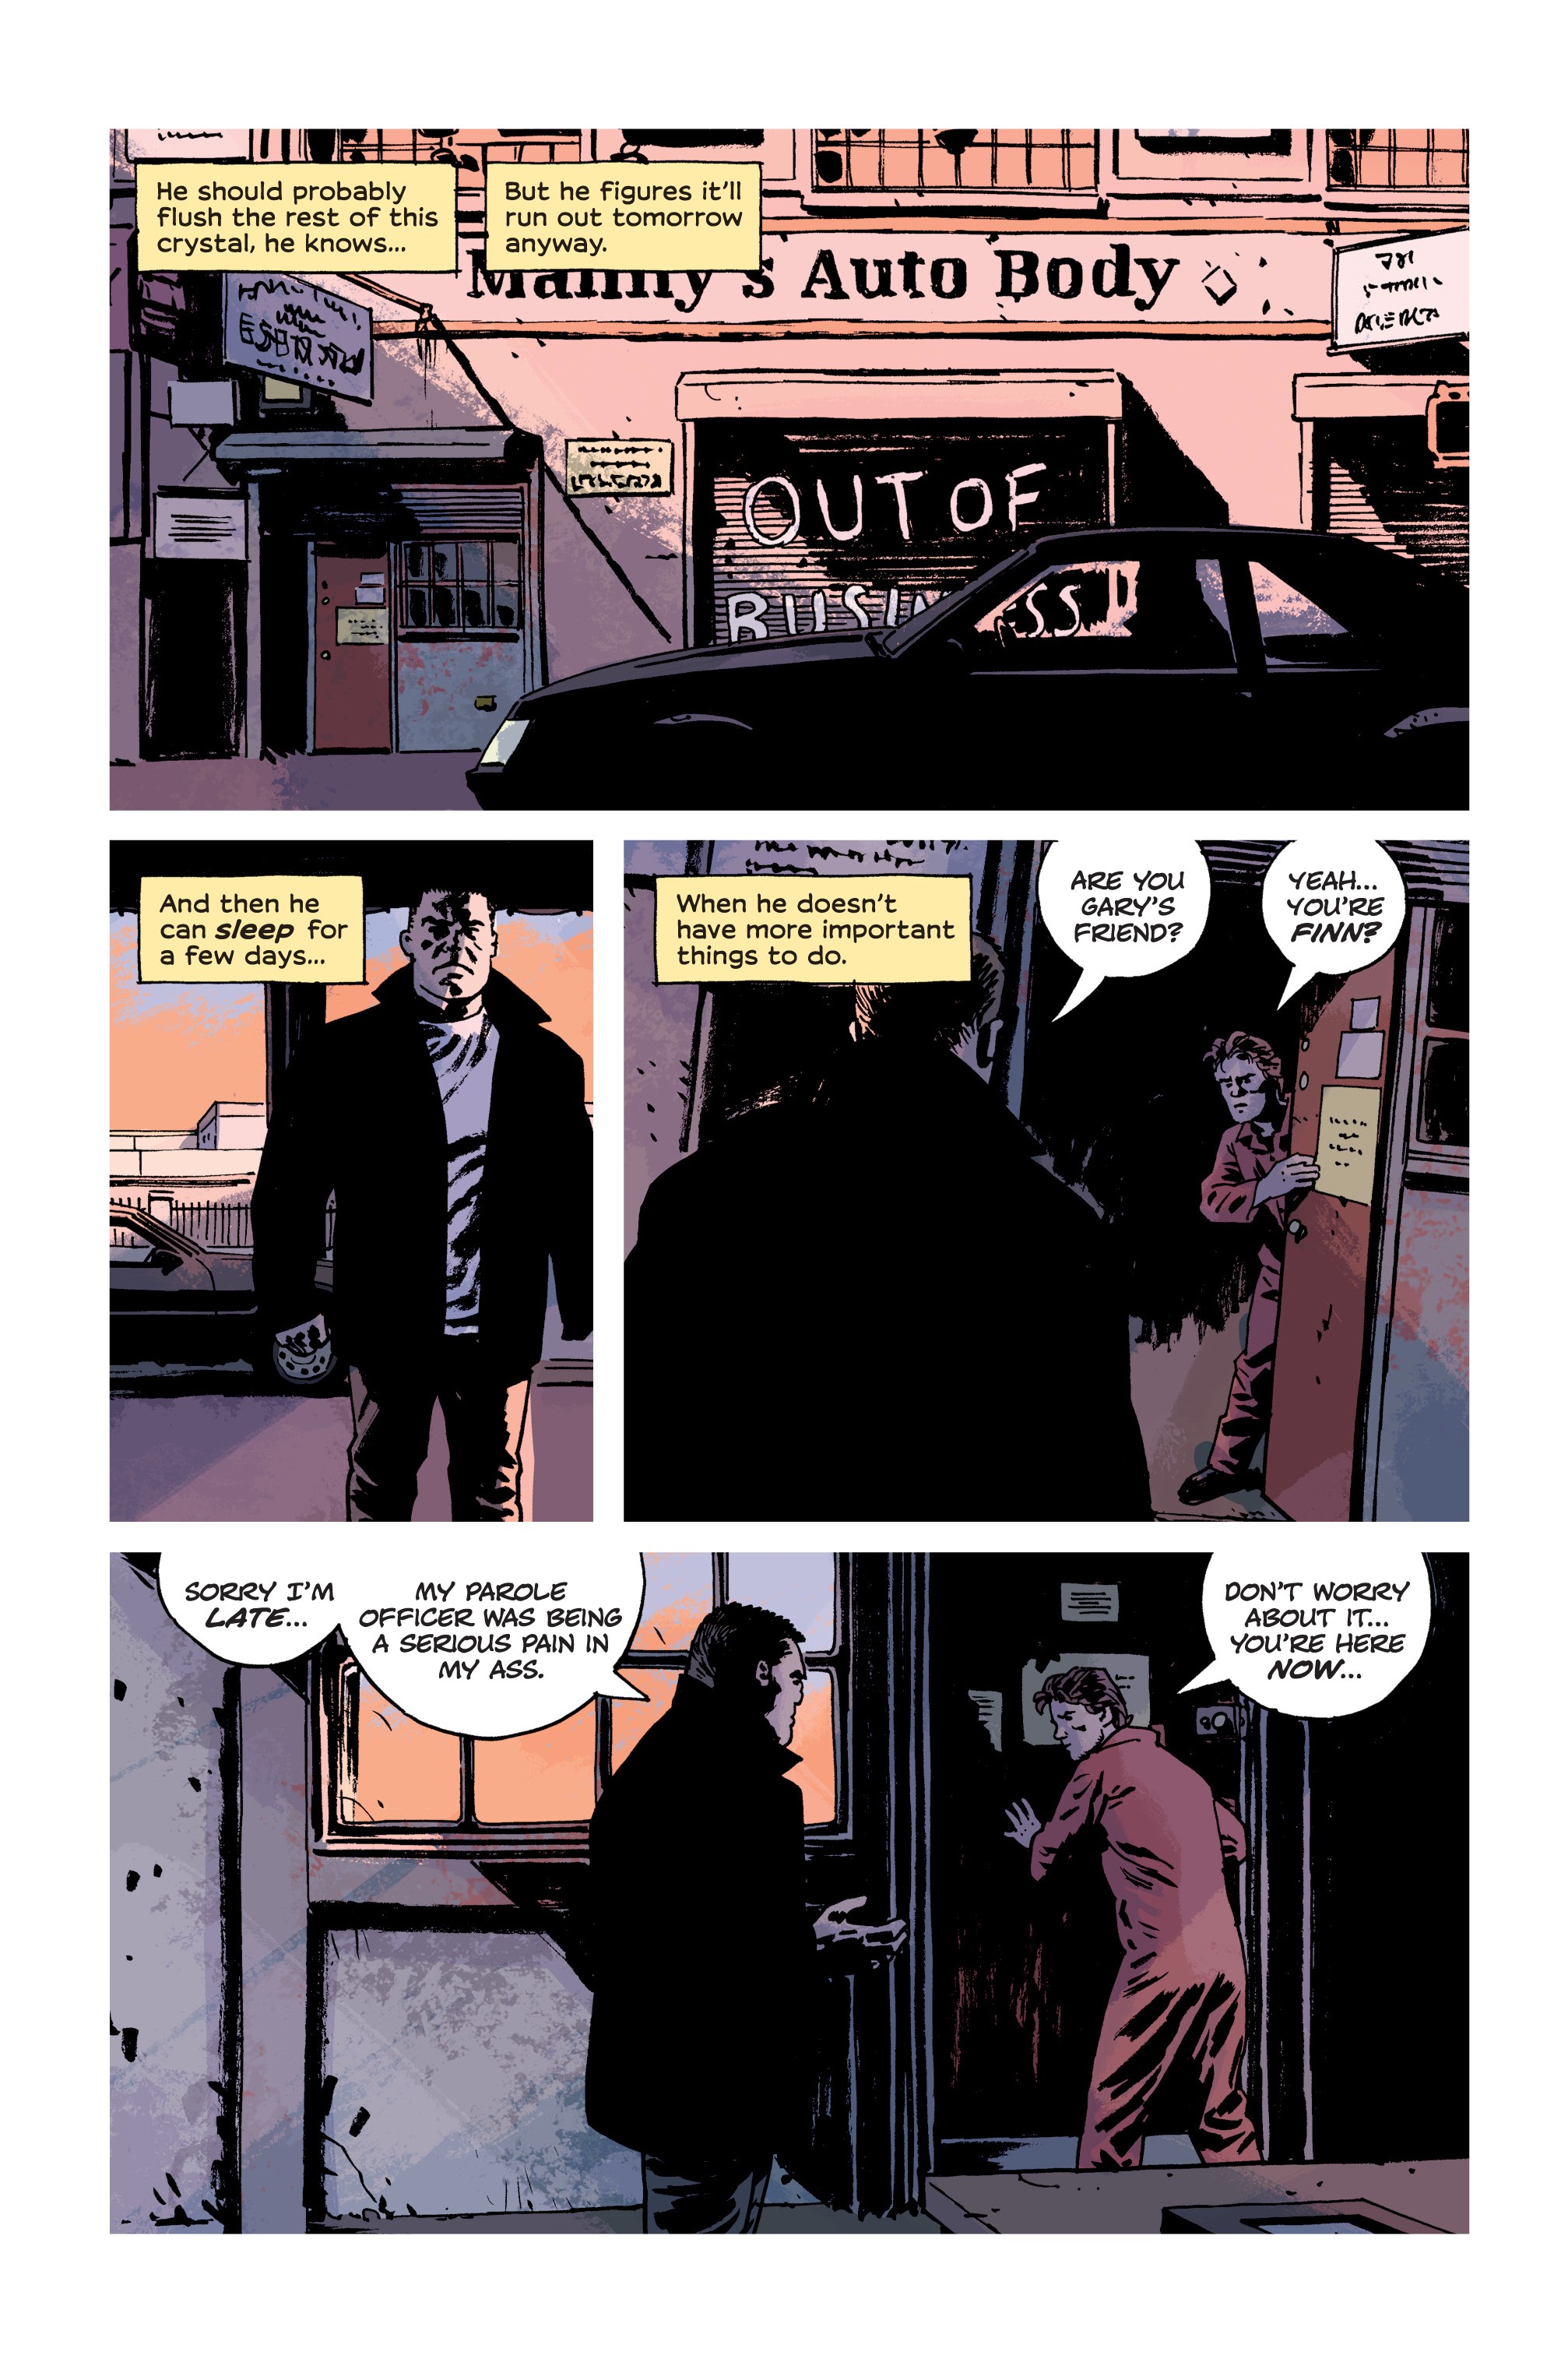 Criminal (2019-): Chapter 4 - Page 5